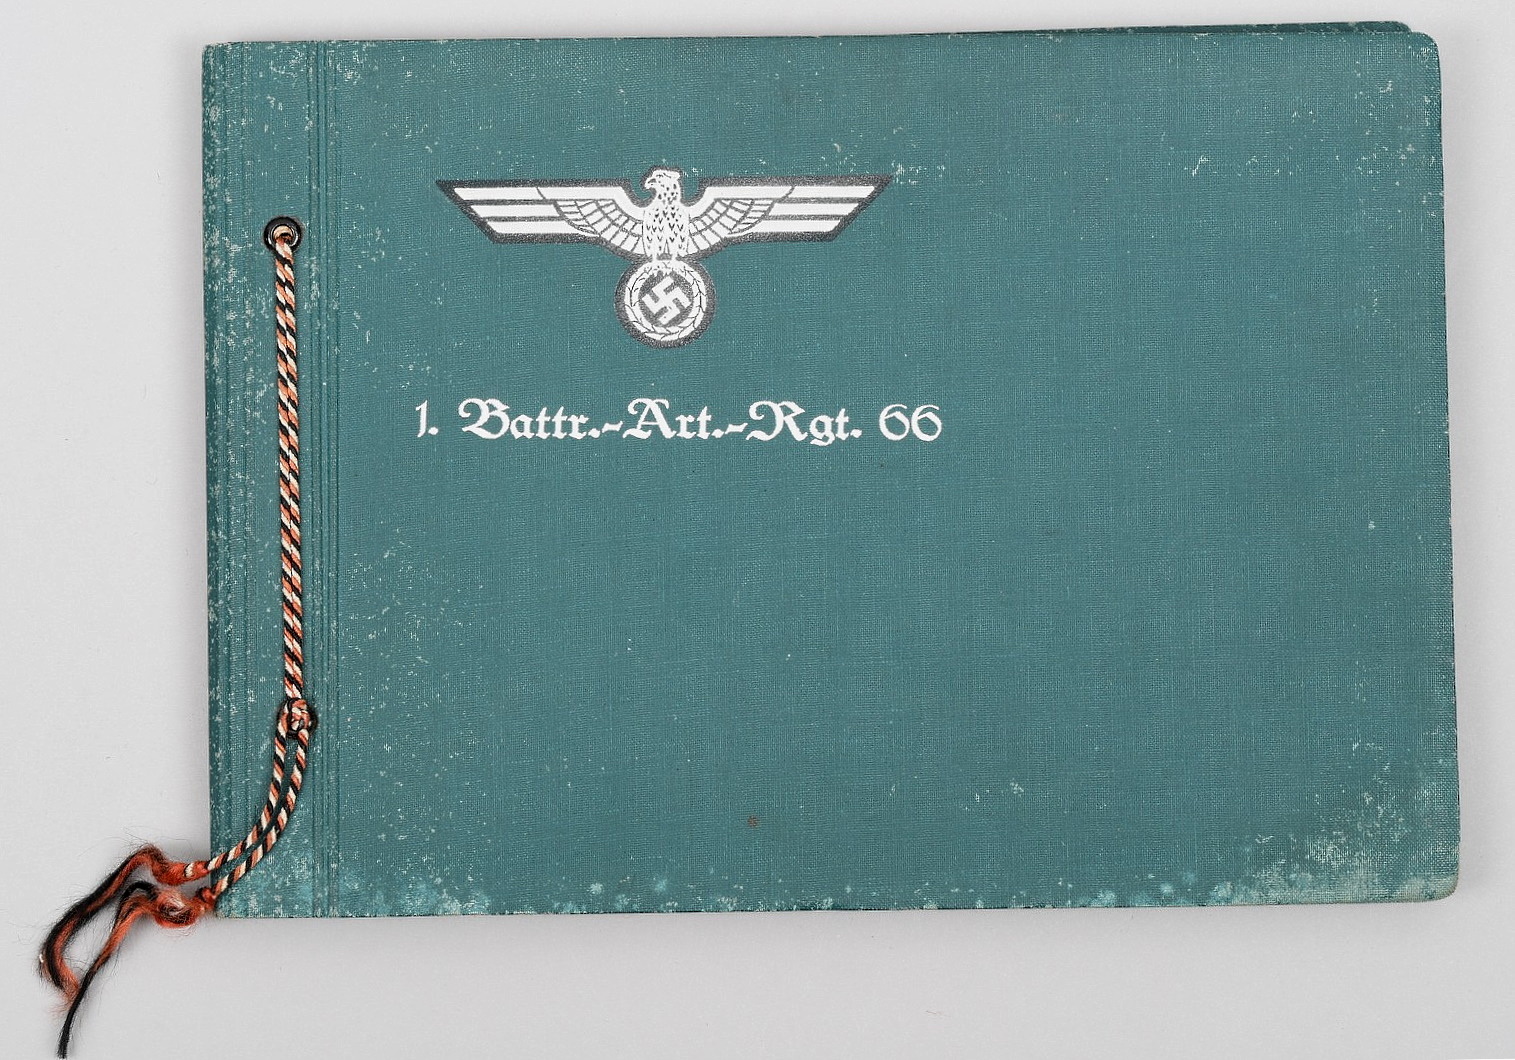 German WWII Art Rgt - 66 Empty and Un-issued Photo Album